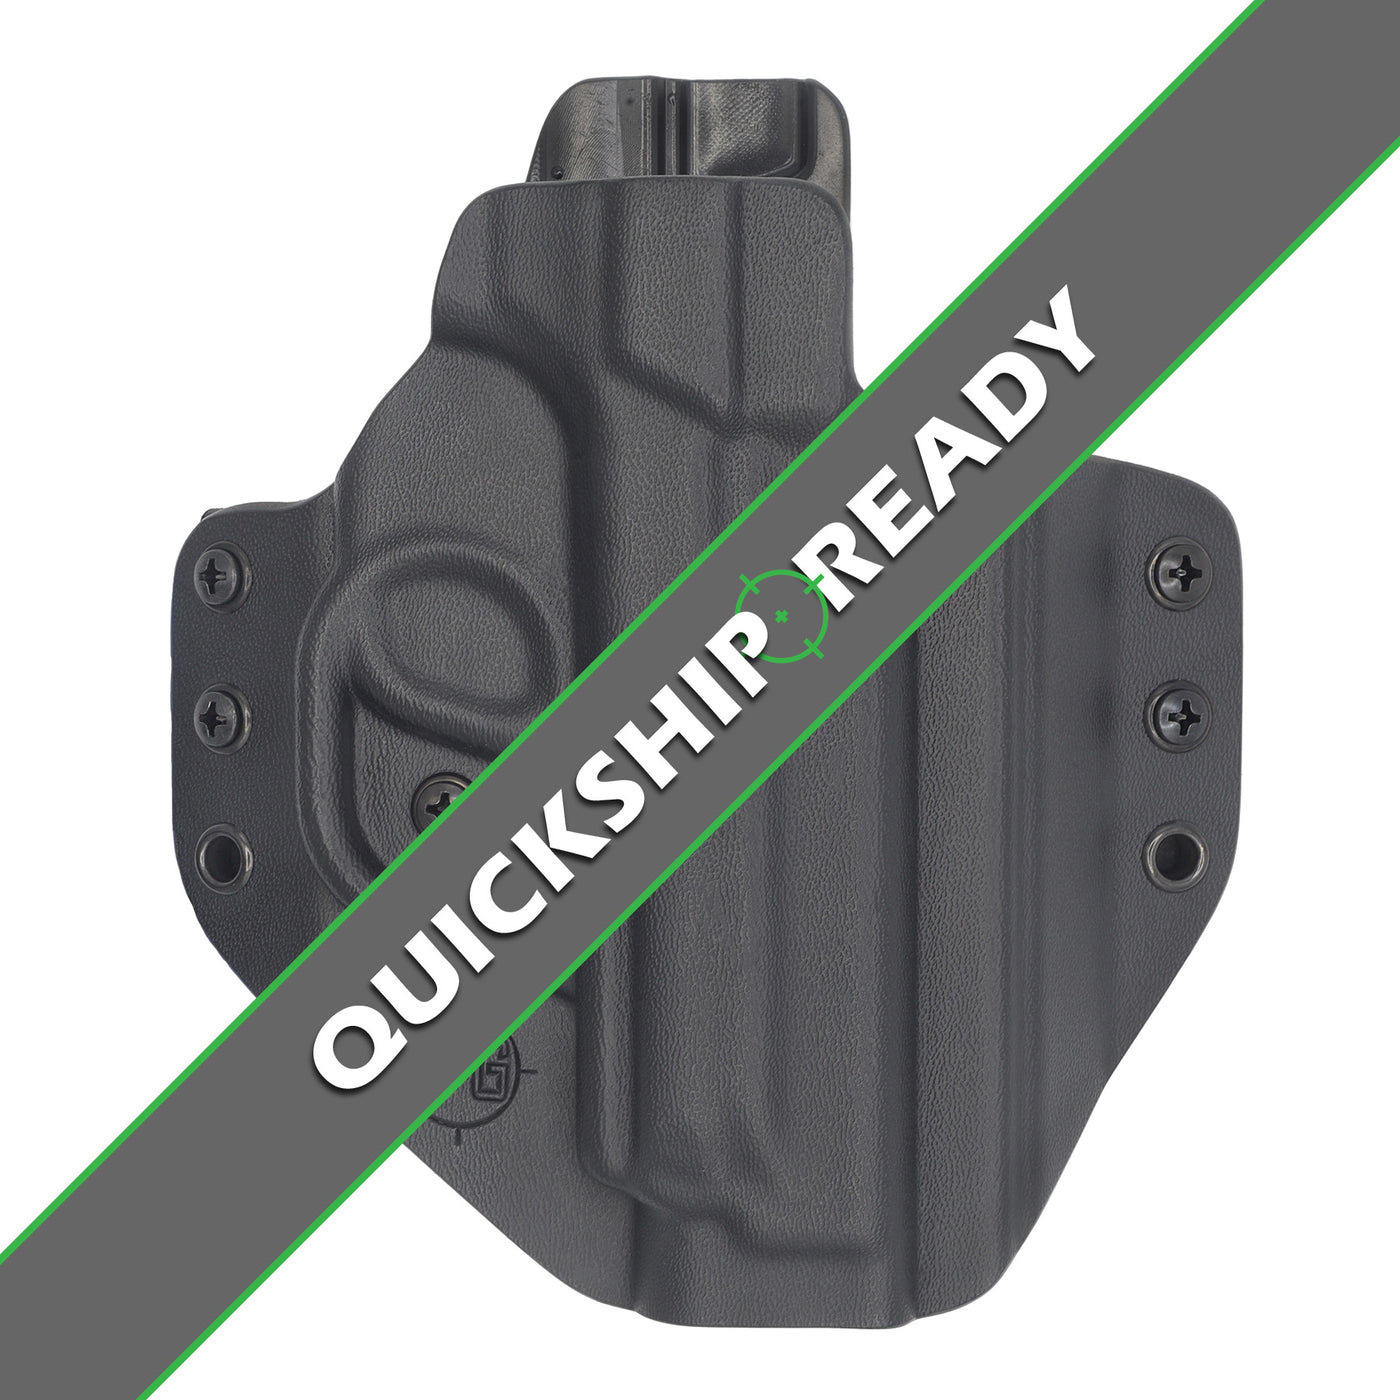 C&G Holsters quick ship Covert OWB kydex holster for Smith & Wesson M&P 2.0 9/40 4.25"